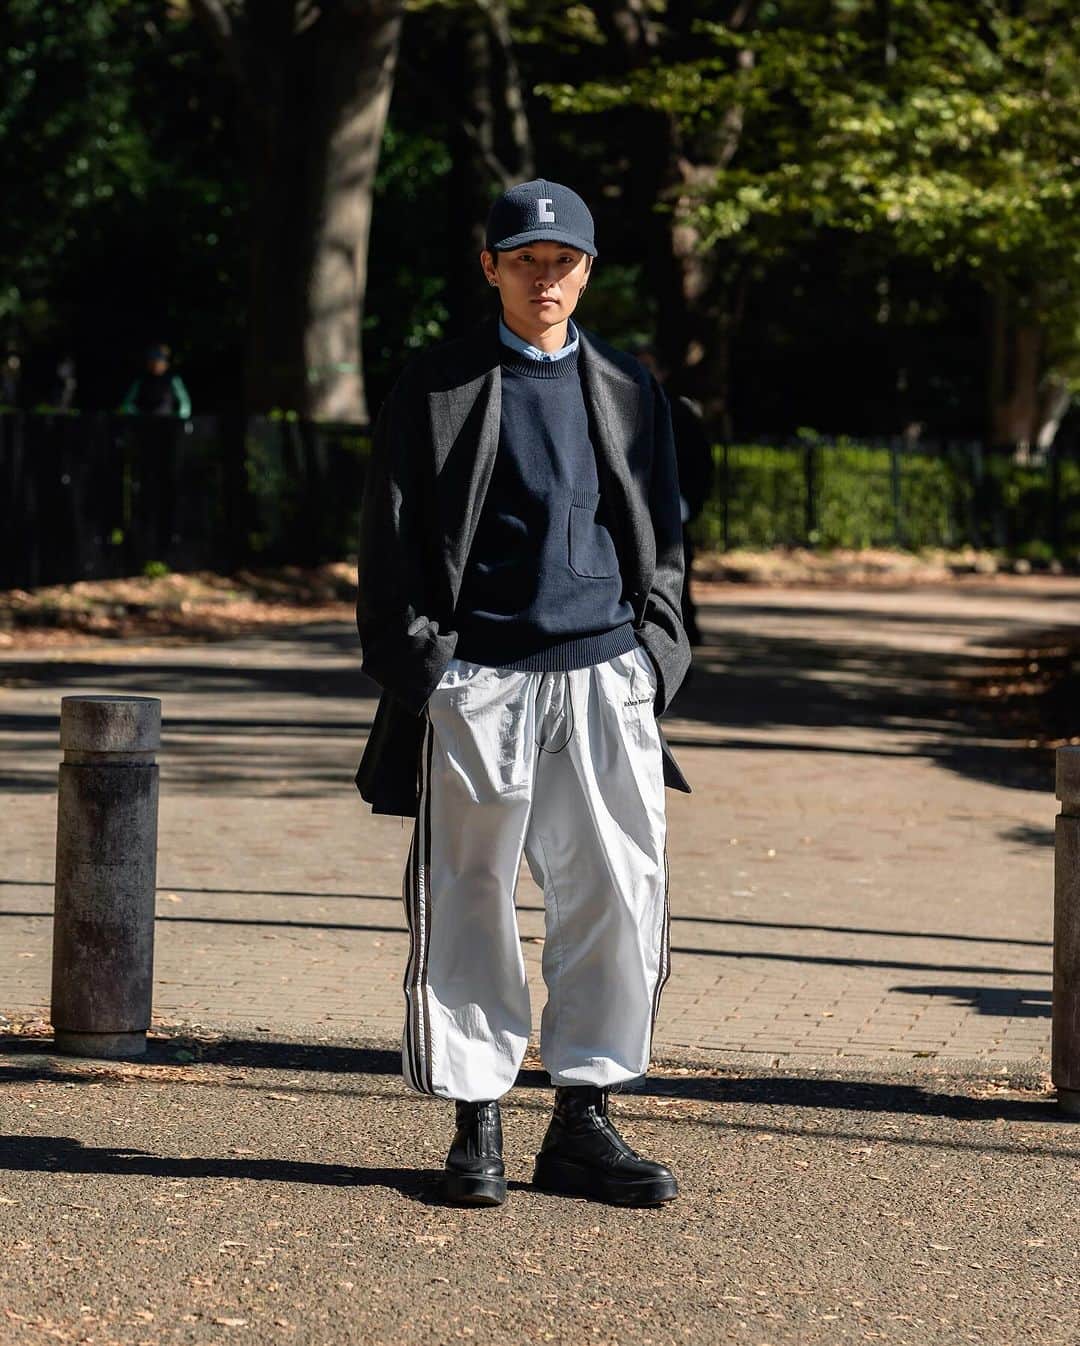 Ryoのインスタグラム：「Today's ㅤㅤㅤㅤㅤㅤㅤㅤㅤㅤㅤㅤㅤoutfit🚶 jacket : @ssstein_design  vest : @_sagenation  shirt : @a.presse_ × @everyone.tokyo  pants : @walesbonner × @adidasoriginals  cap : @the_clesste shoes : @therow  ㅤㅤㅤㅤㅤㅤㅤㅤㅤㅤㅤㅤㅤ #clesste #sagenation  #apresse #everyone #adidas #therow」